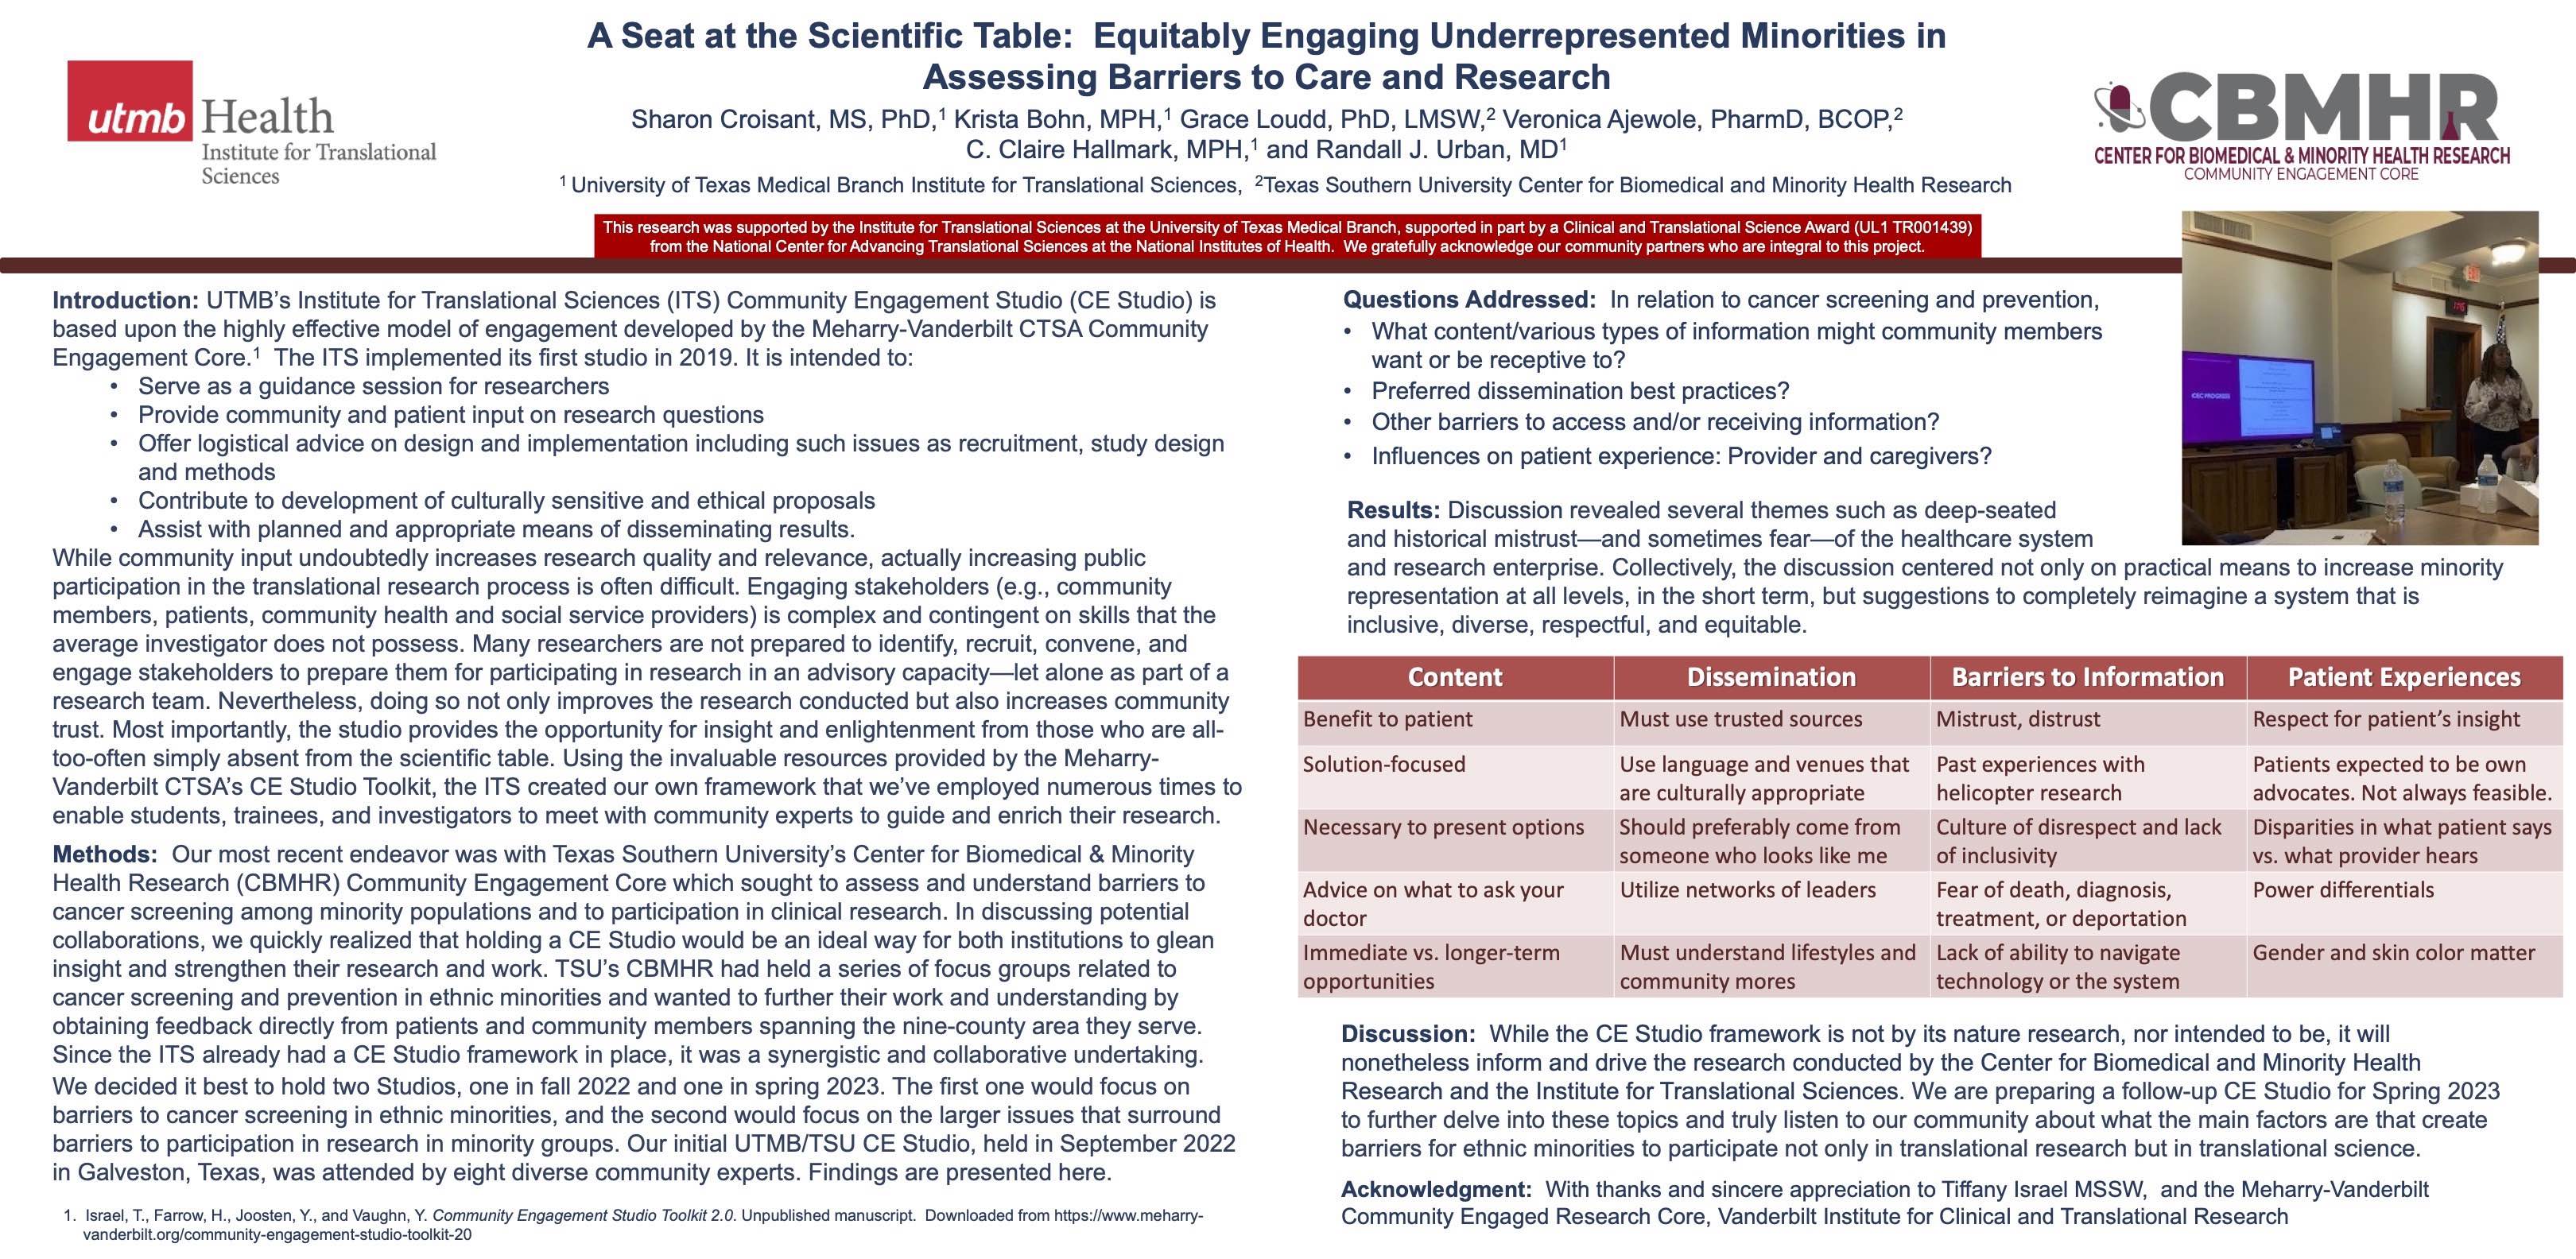 Image of posters on equitable engagement of underrepresented minorities in medical research